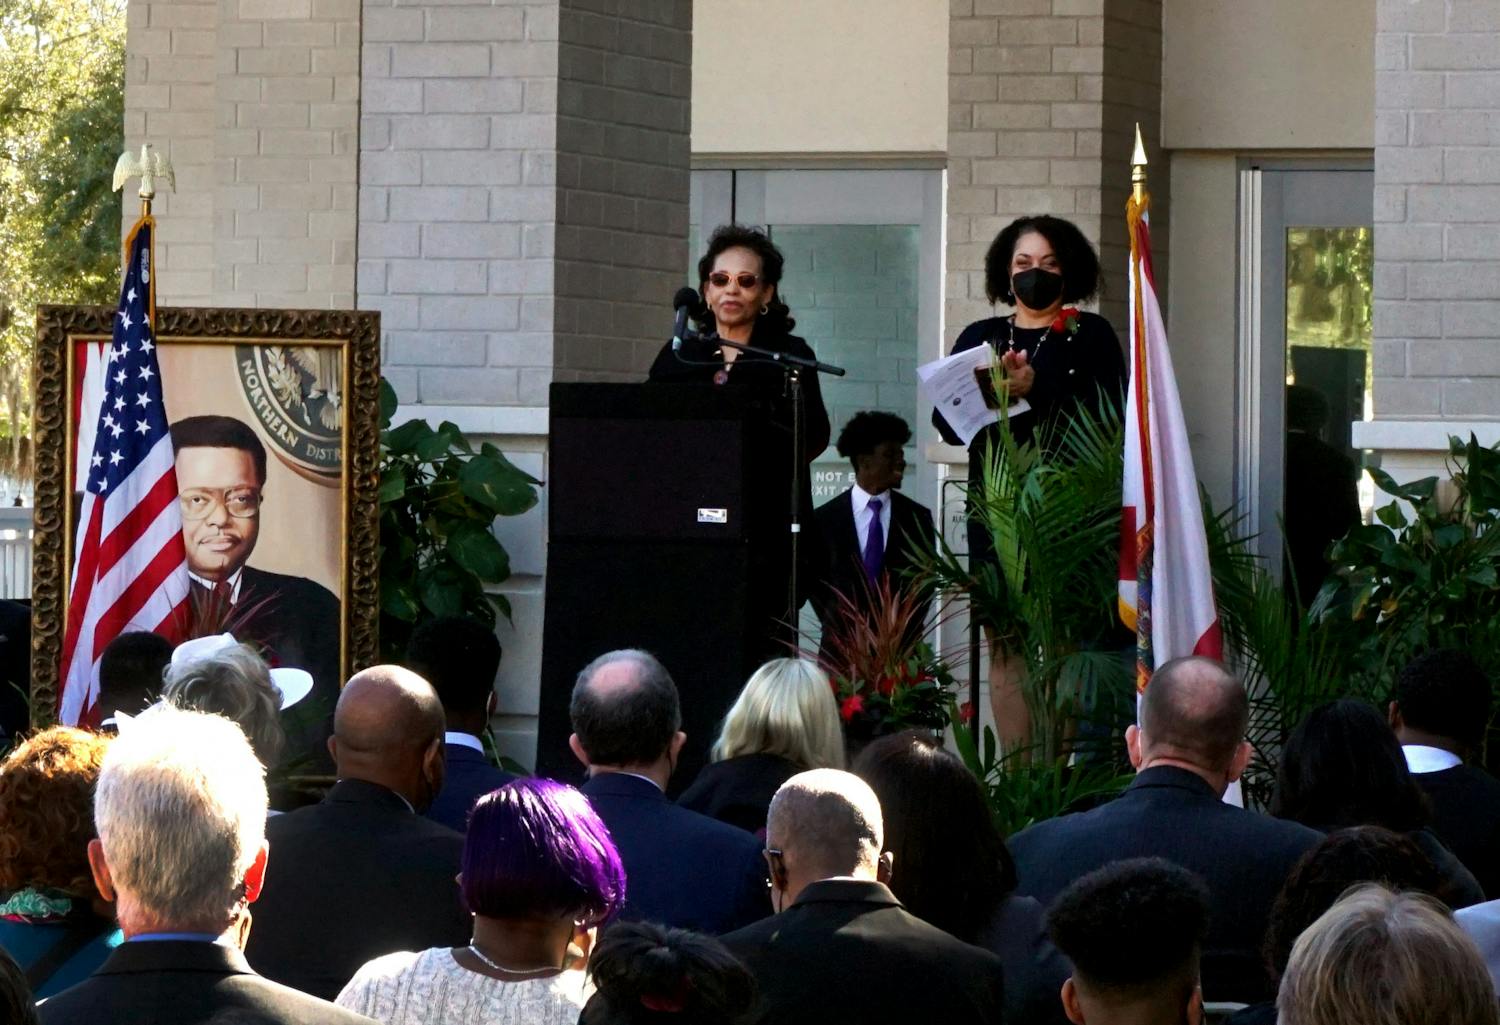 Judge Stephan Mickle's wife, Evelyn Mickle, speaks at the podium about her husband's trailblazing legacy at the renaming ceremony of the Alachua County Courthouse on Friday, Jan. 14. The courthouse is located at 220 S. Main St. 